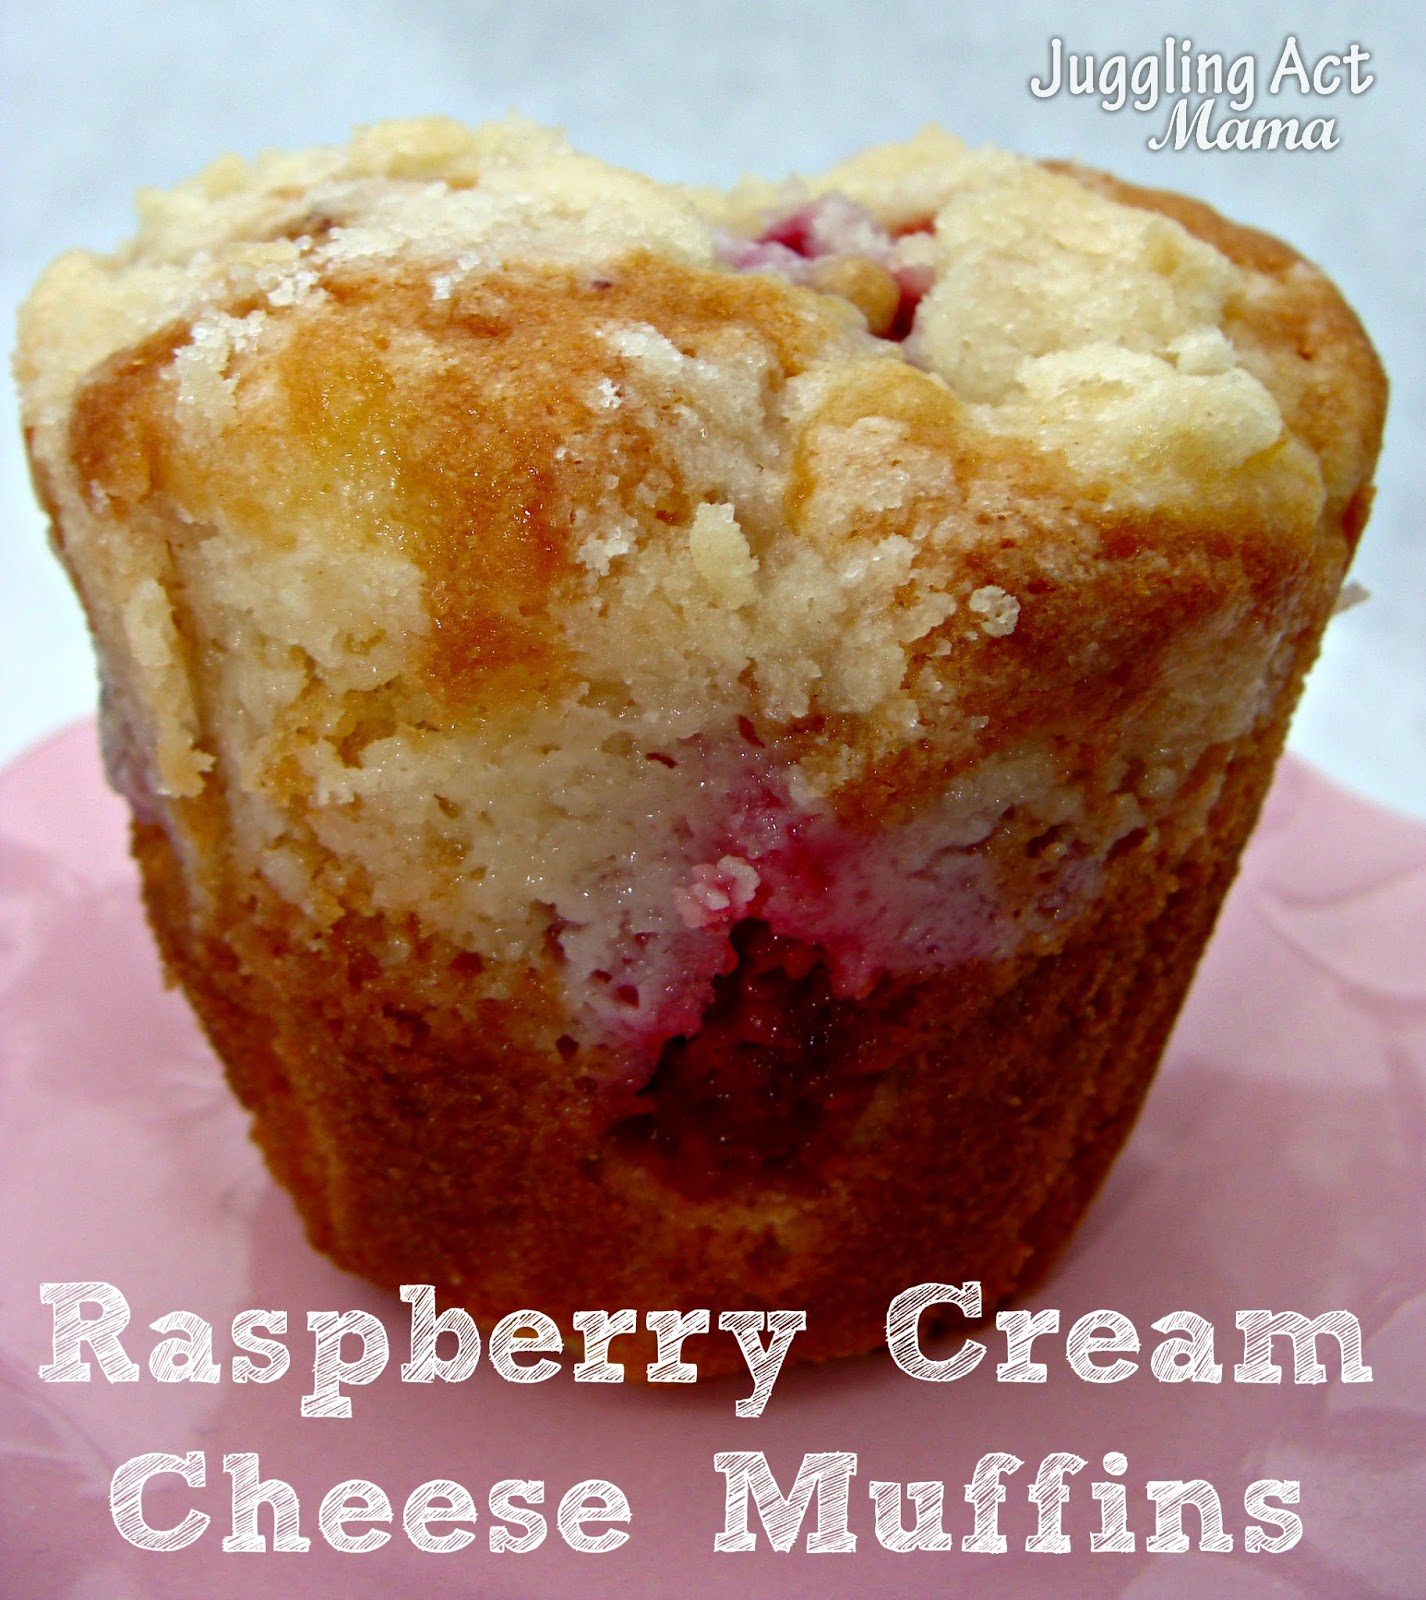 Close up image of a raspberry cream cheese muffin on a pink paper napkin.